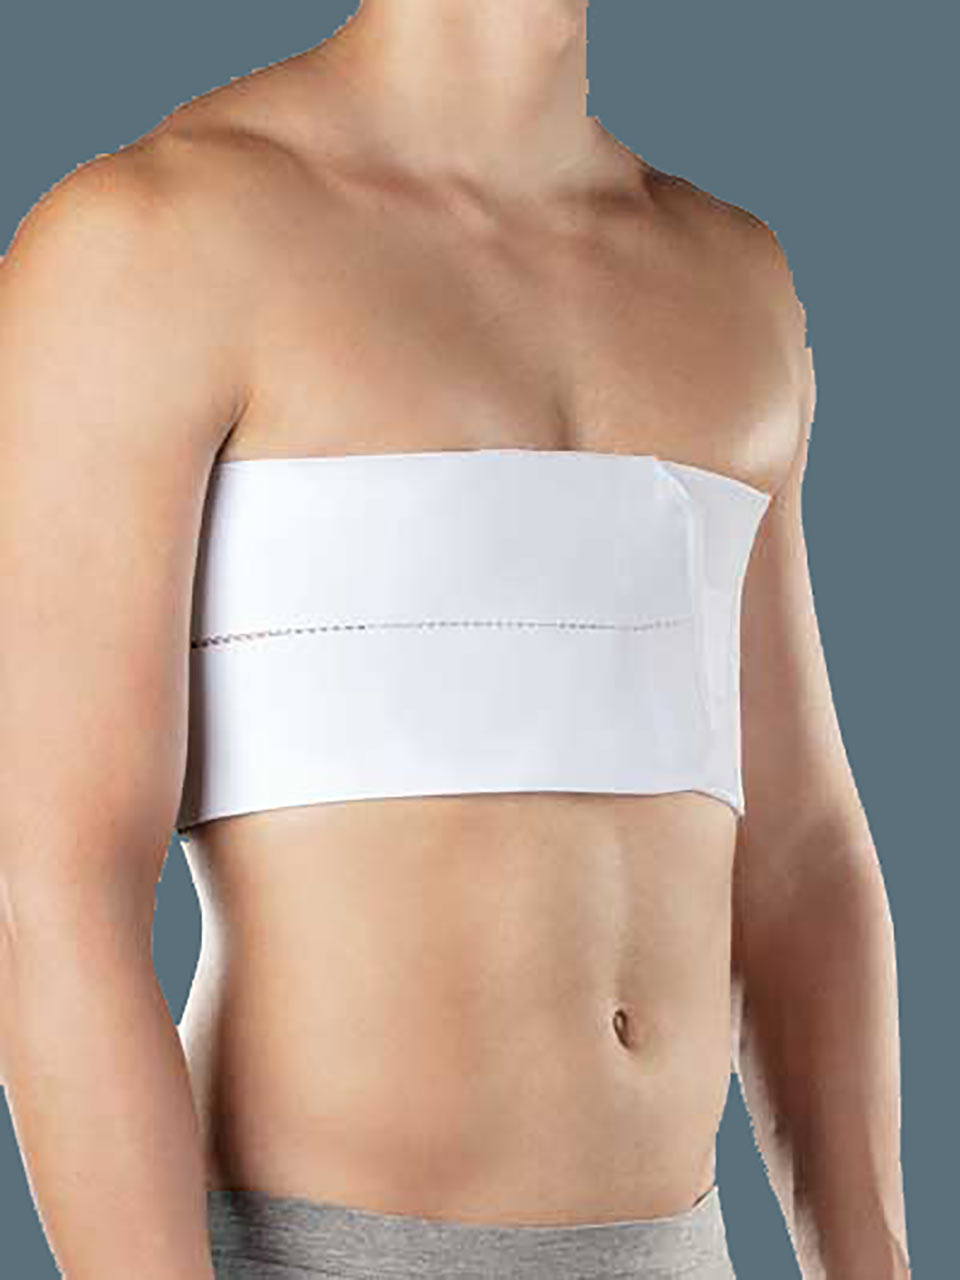 Elastop - Post-operative thoracic band support